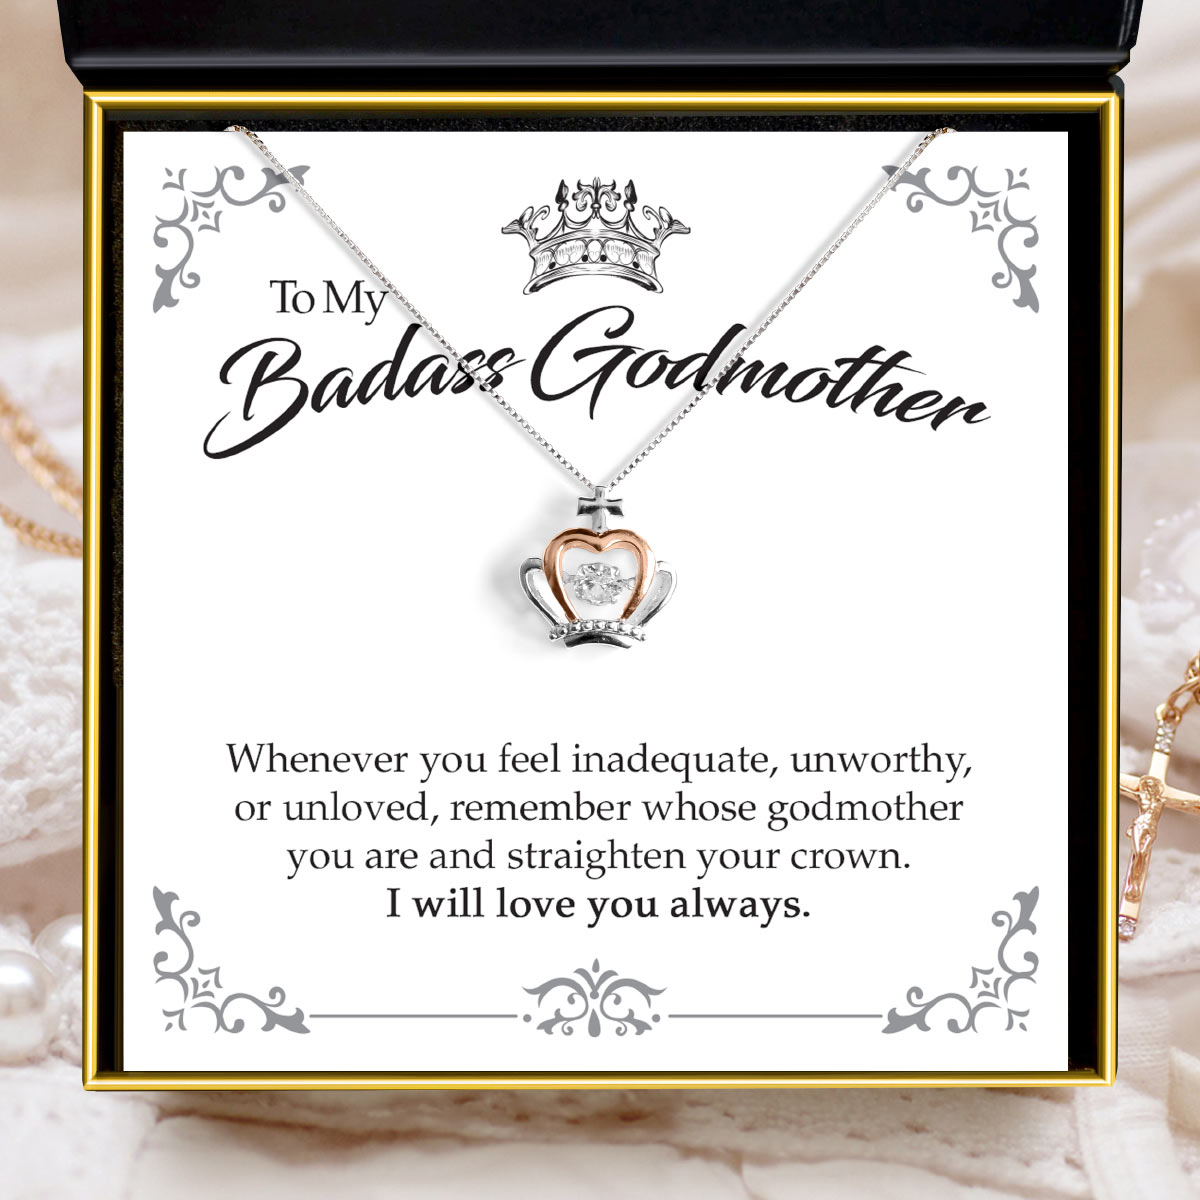 To My Badass Godmother - Luxe Crown Necklace Gift Set